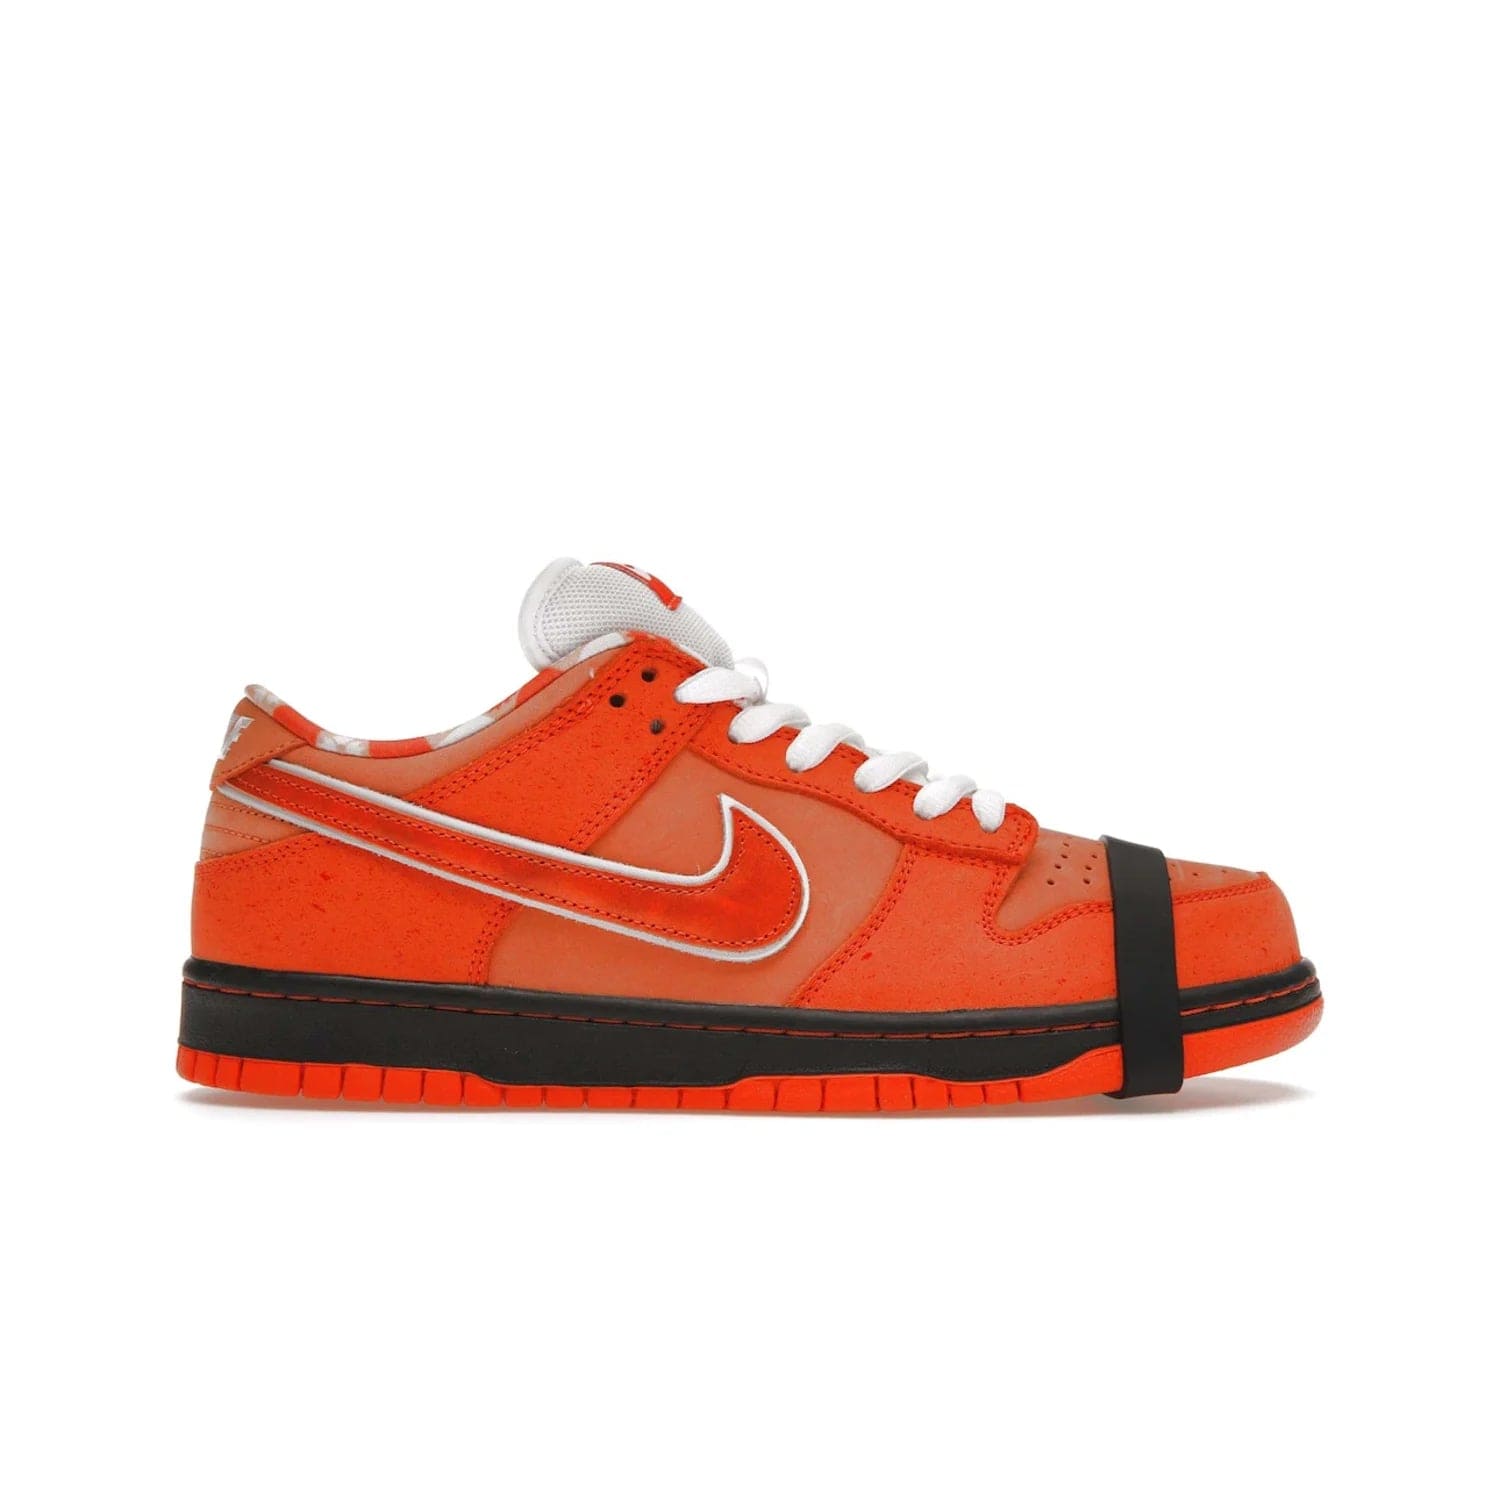 Nike SB Dunk Low Concepts Orange Lobster - Image 1 - Only at www.BallersClubKickz.com - Make a statement with the Nike SB Dunk Low Concepts Orange Lobster. Variety of orange hues, nubuck upper, bib-inspired lining & rubber outsole create bold look & comfortable blend of style. Available December 20th, 2022.